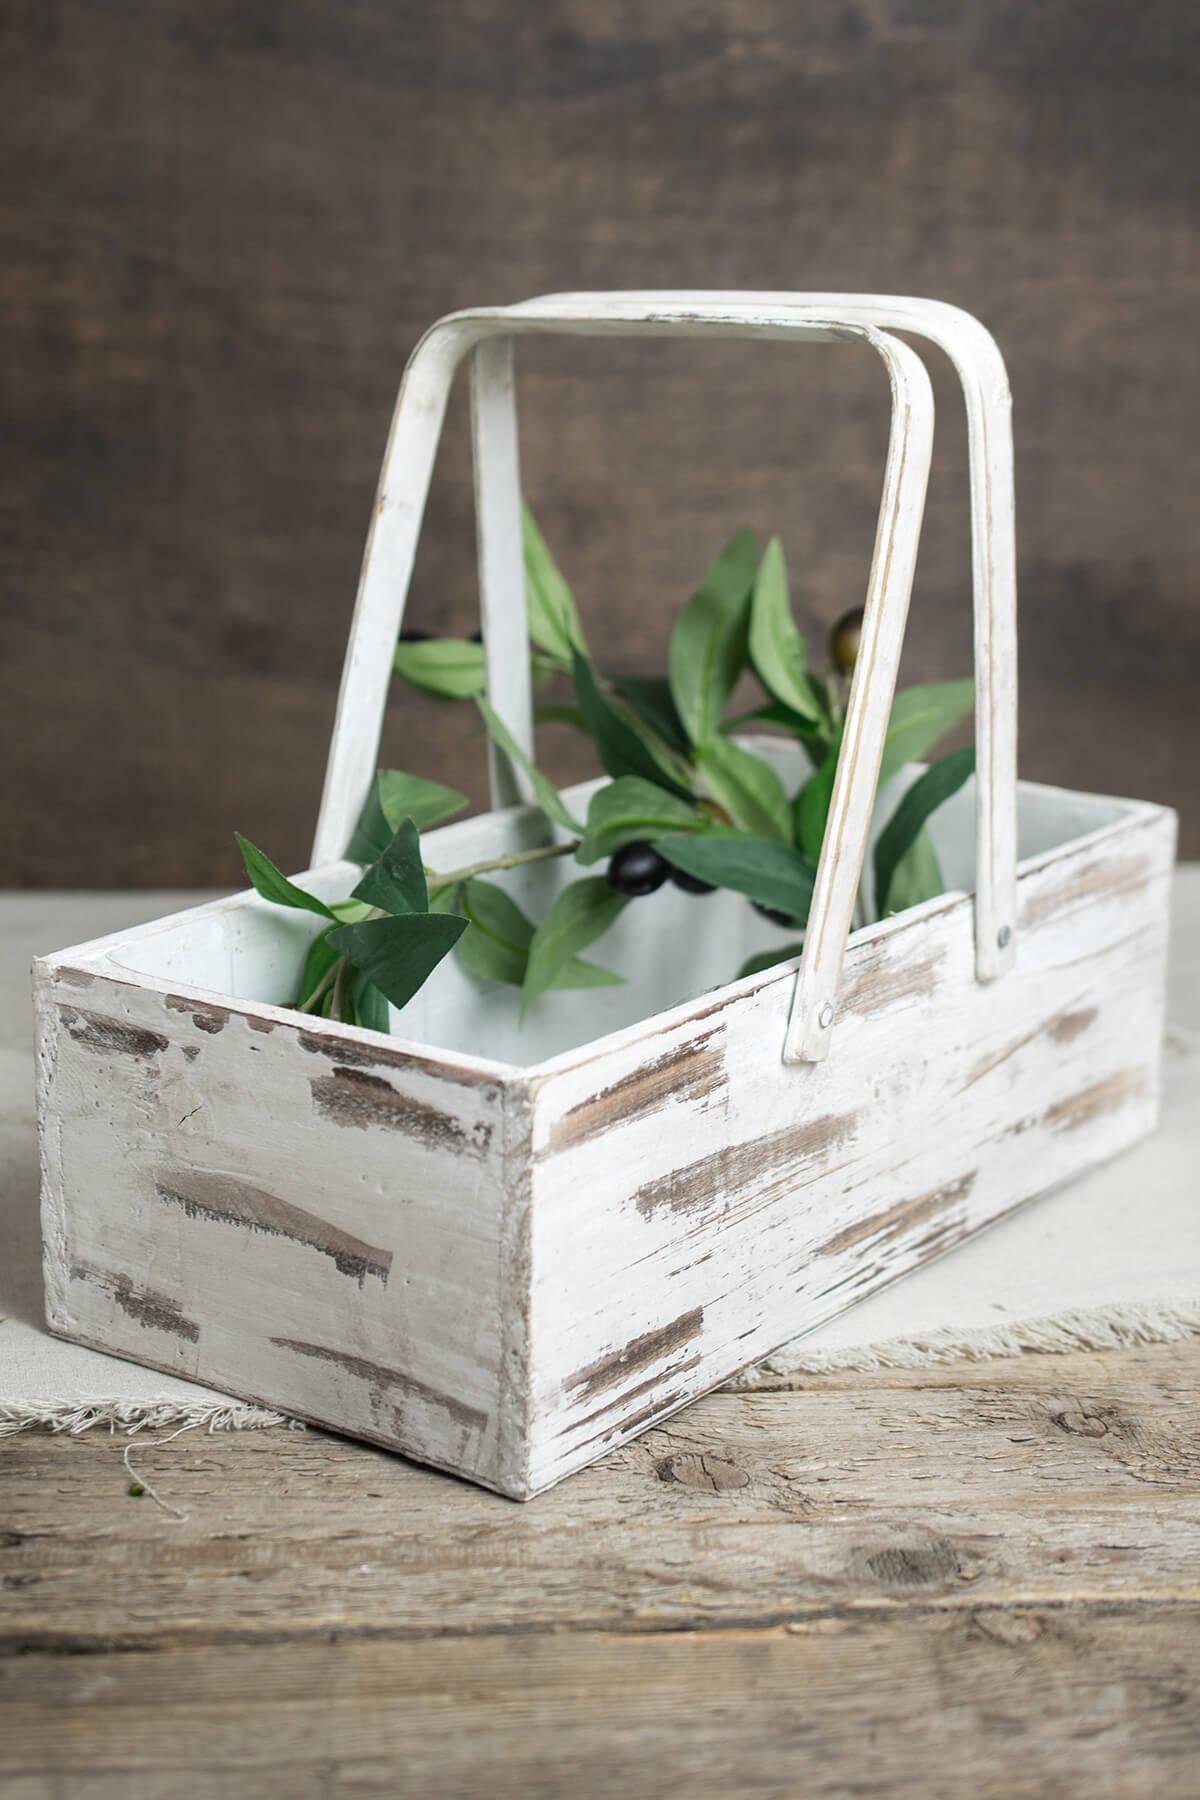 wood planter box basket with handles 6x12in